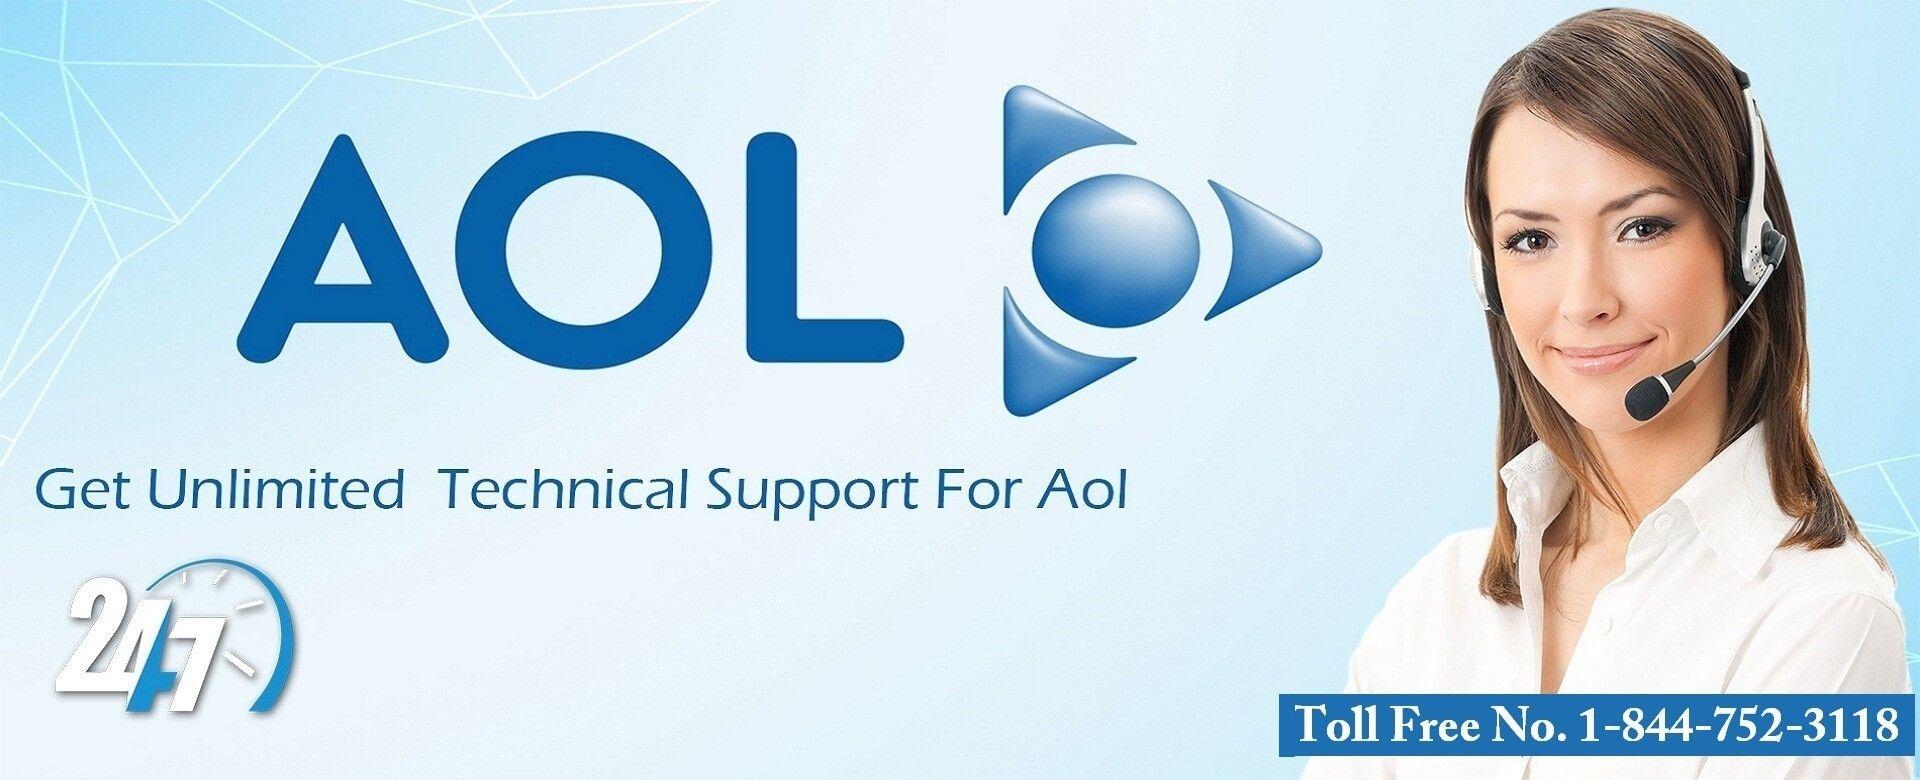 AOL Email Logo - Aol Email Live Support | AOL customer Support - eMailAOL.Co